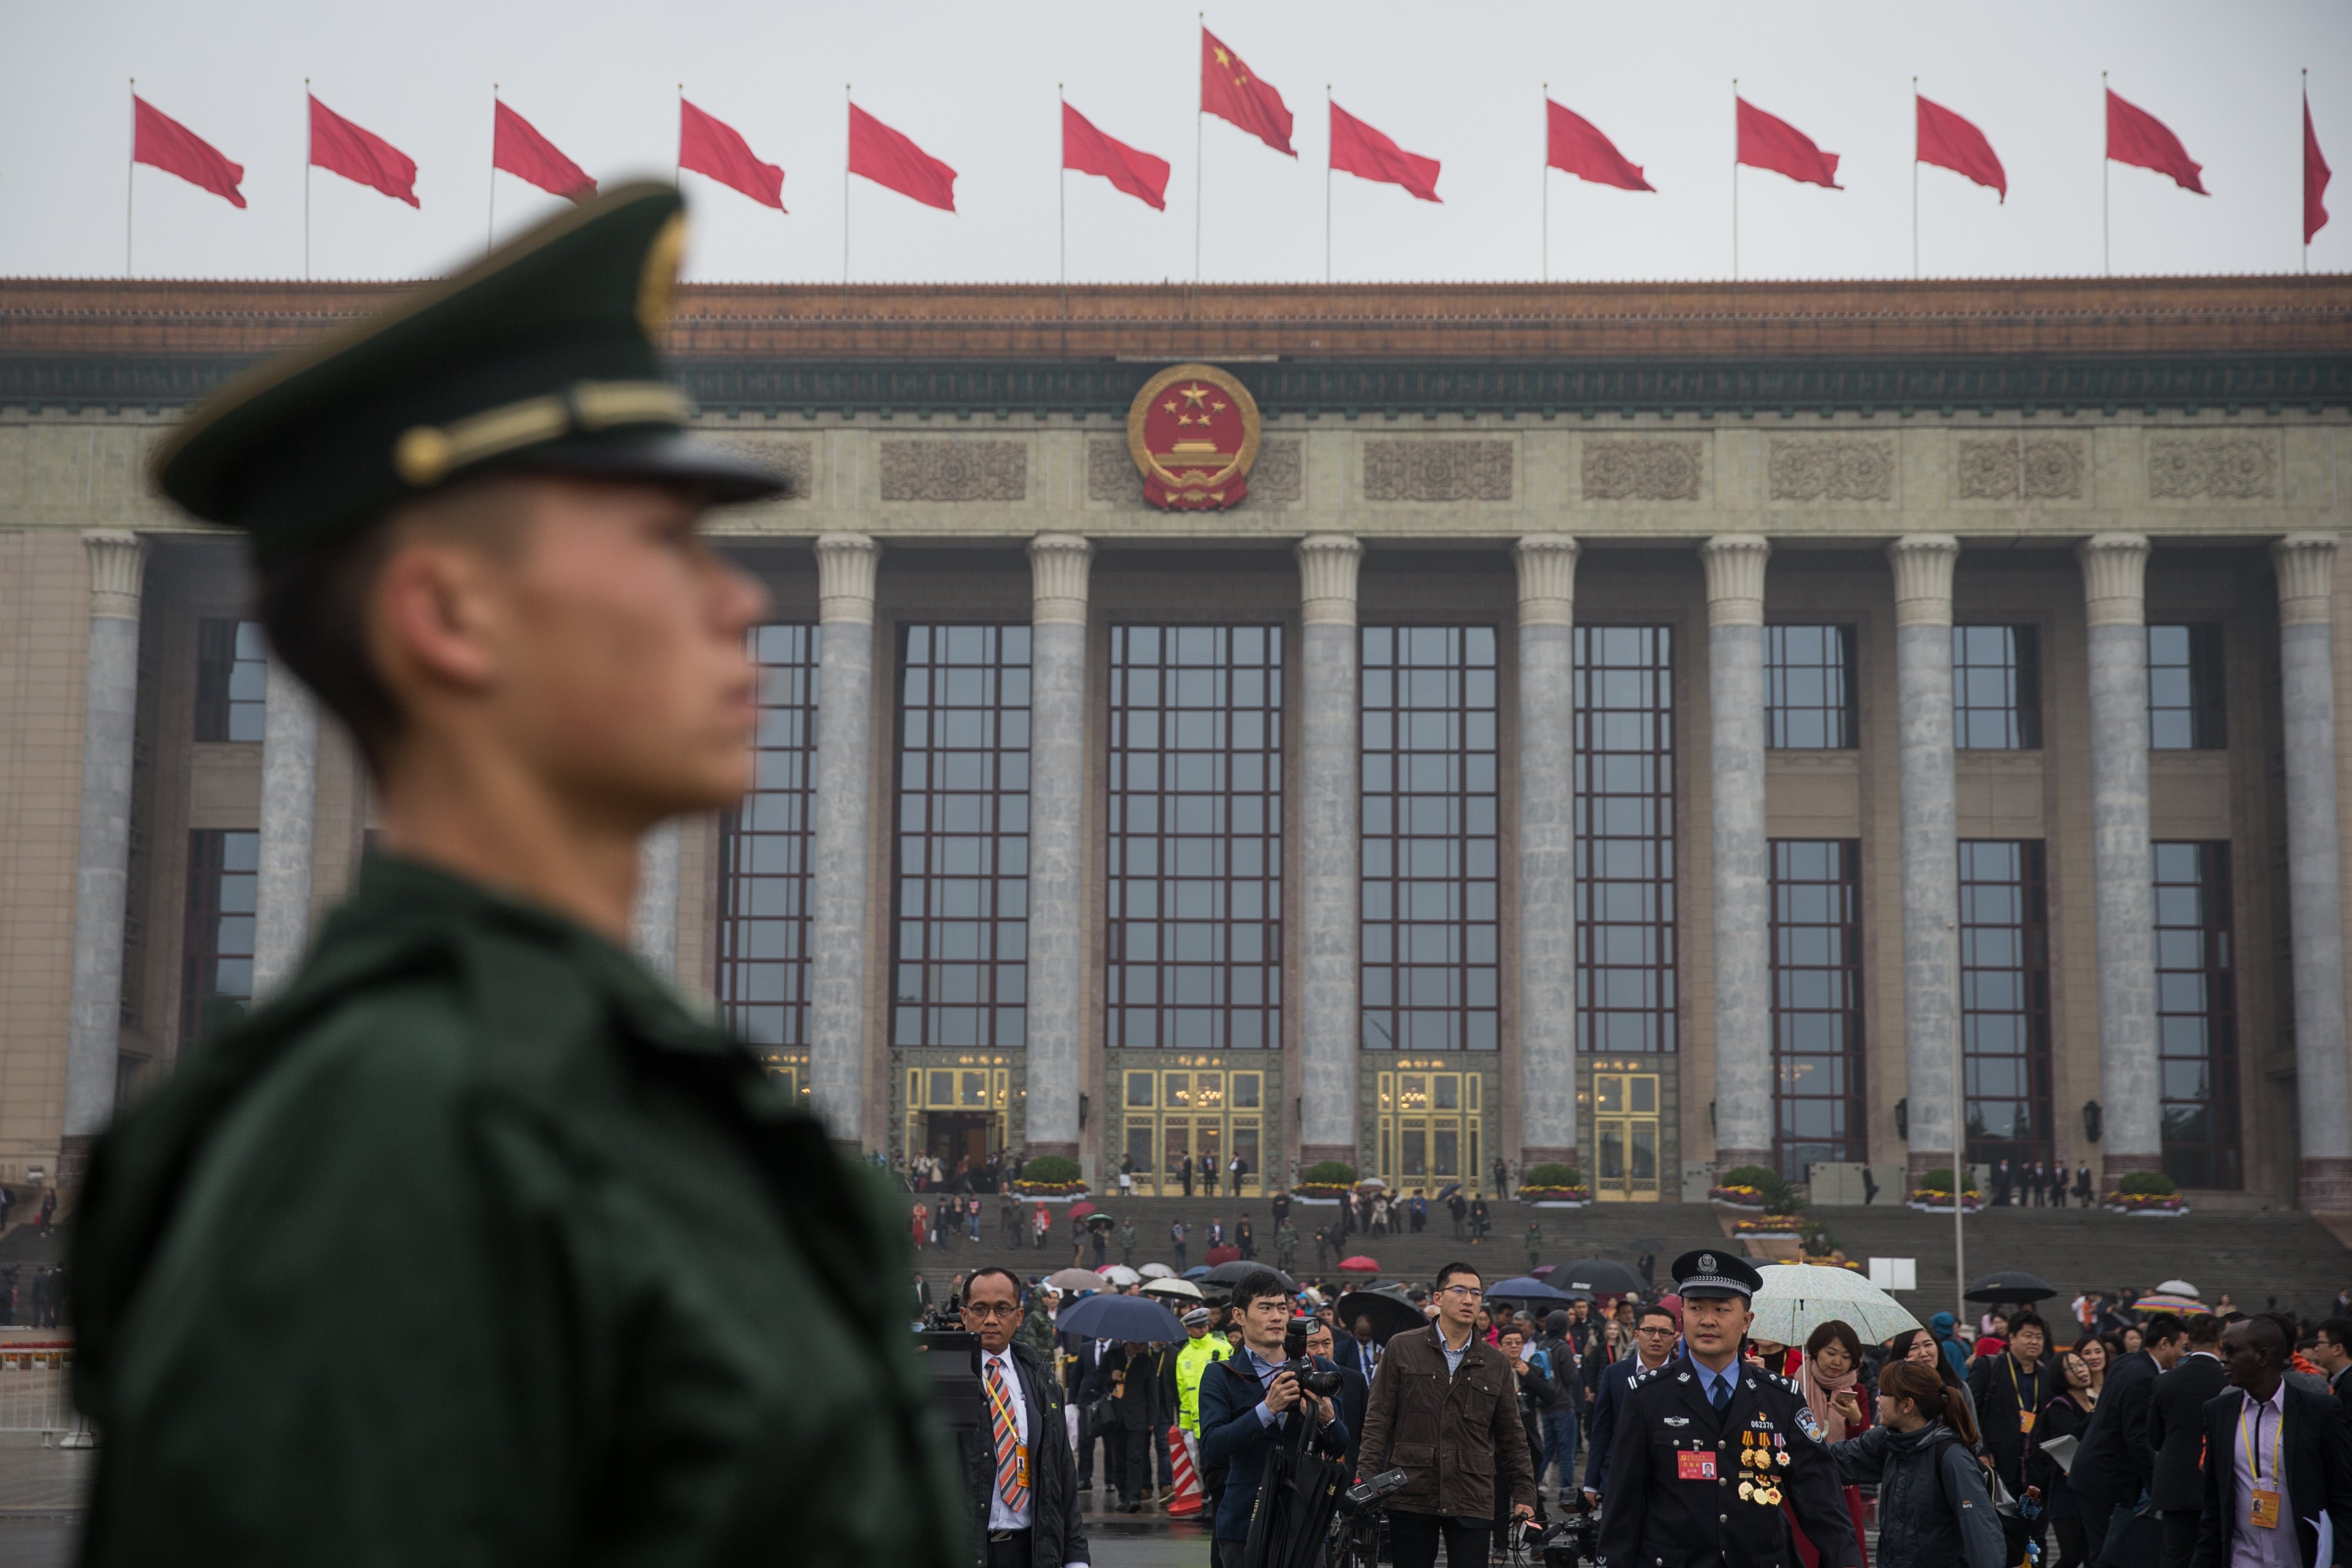 Delegates leave the Great Hall of the People in Beijing on Wednesday at the end of the opening session of the 19th National Congress of the Communist Party of China. Photo: EPA